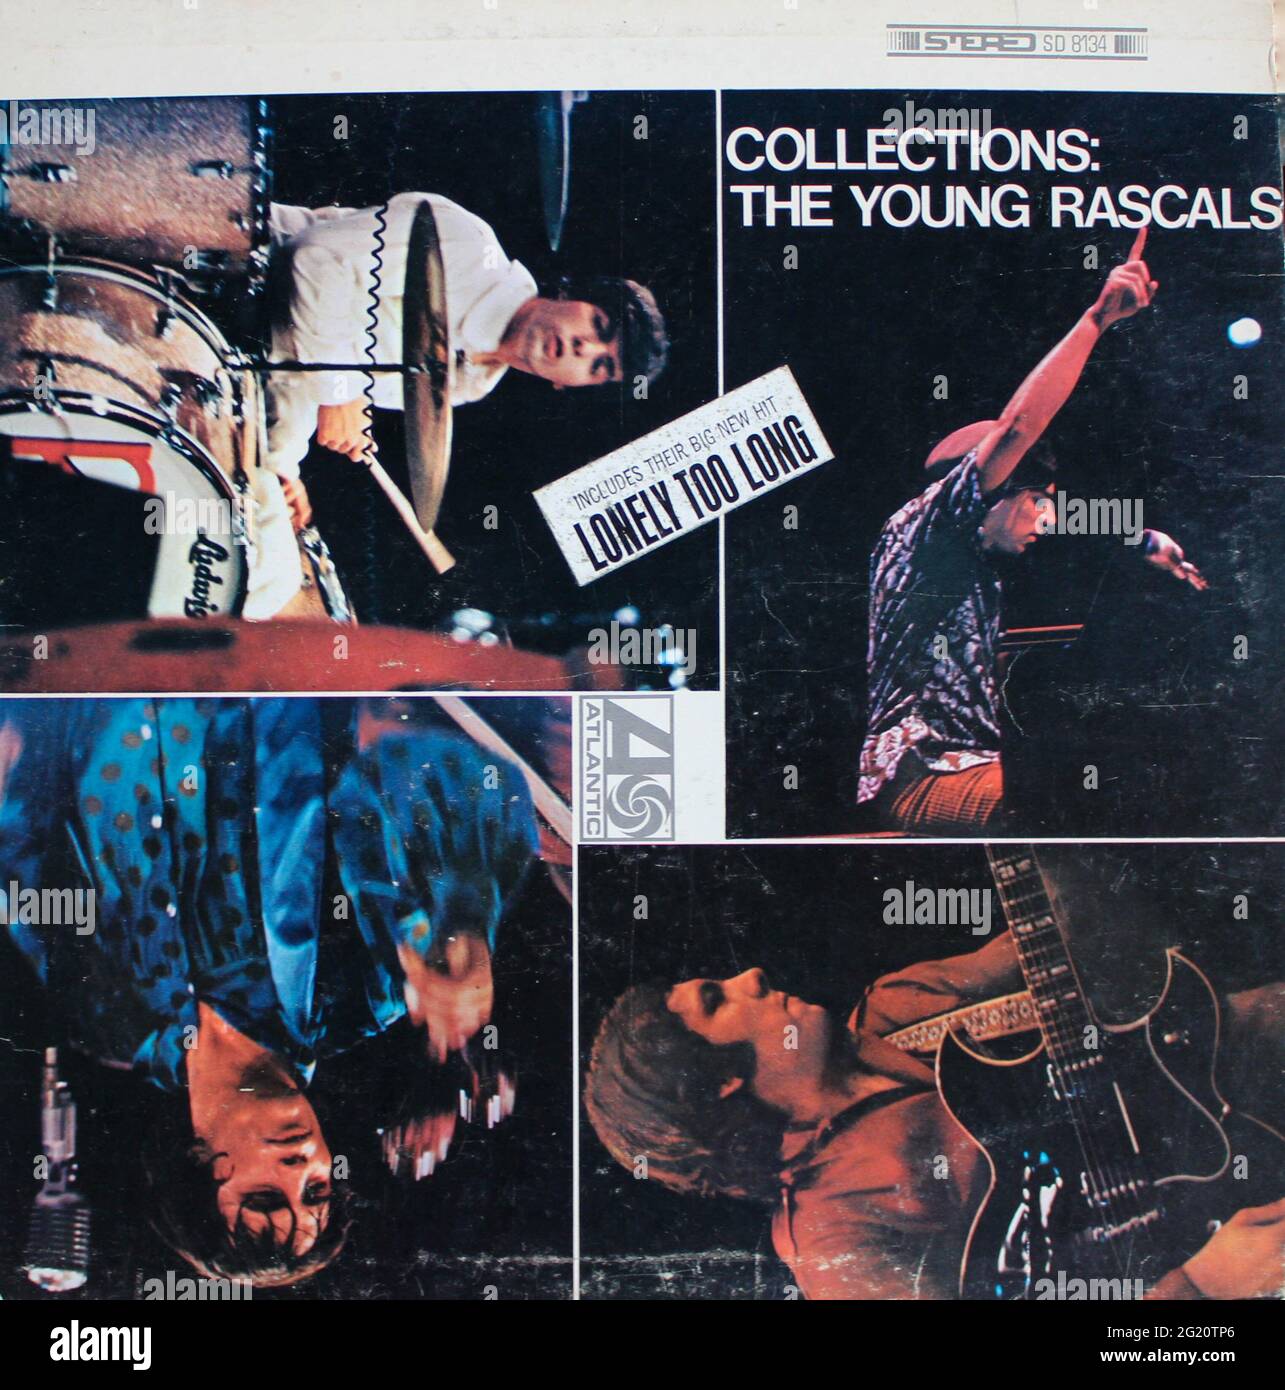 Rock and pop band, The Rascals music album on vinyl record LP disc. Titled: Time Peace: Collections The Young Rascals album cover Stock Photo